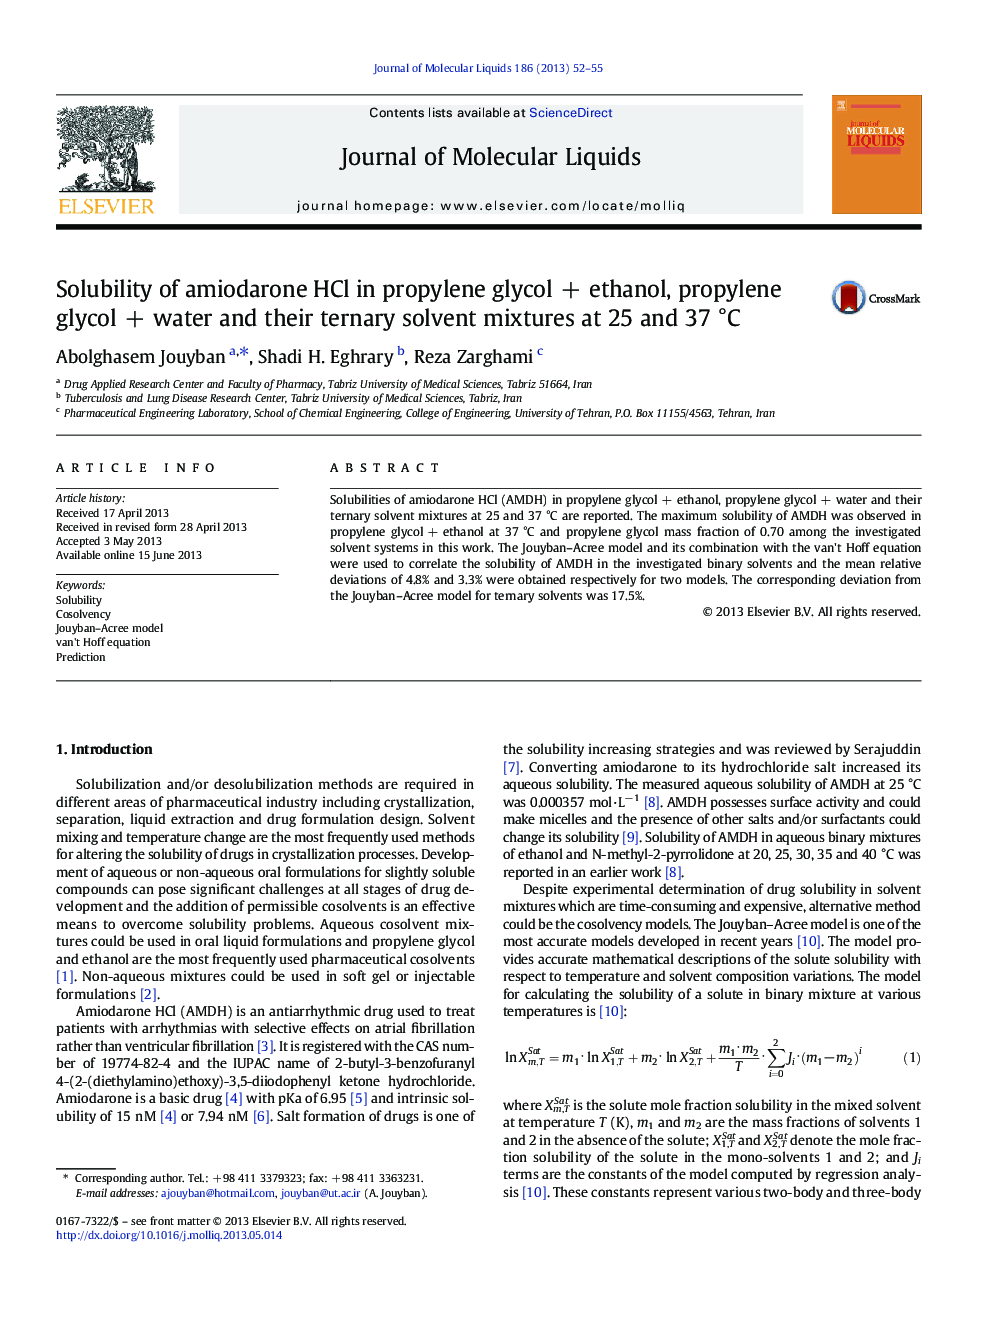 Solubility of amiodarone HCl in propylene glycolÂ +Â ethanol, propylene glycolÂ +Â water and their ternary solvent mixtures at 25 and 37Â Â°C